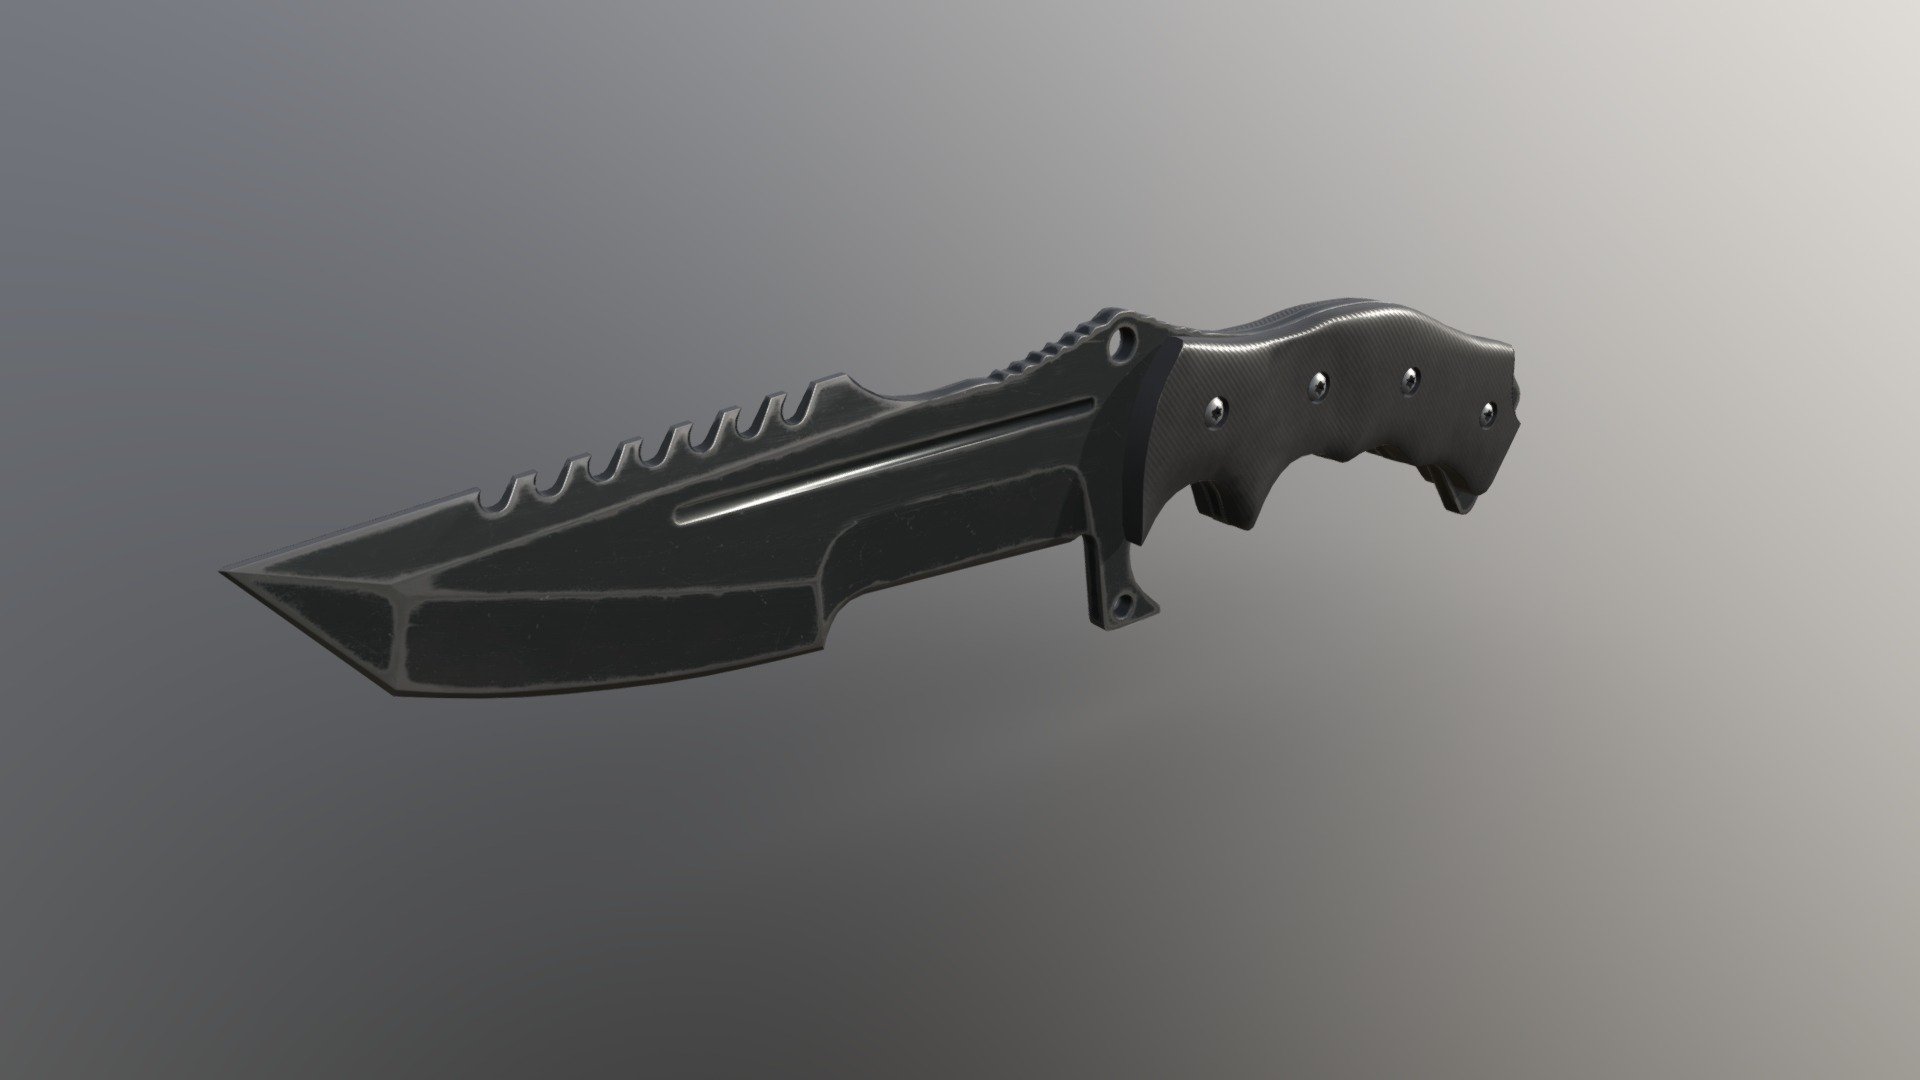 This is low-poly model of worn out Huntsman knife.

Model is built to real-world scale.

Polycount:

Polygons count: 2,832

Vertices count: 2,596

Triangles count: 4,678

Modeled in Blender, textured in Substance Painter

2K texture set.

I will be glad like and comment

Portfolio: https://www.artstation.com/oliver465 - Huntsman Knife - Download Free 3D model by Serhii (@Oliver465) 3d model